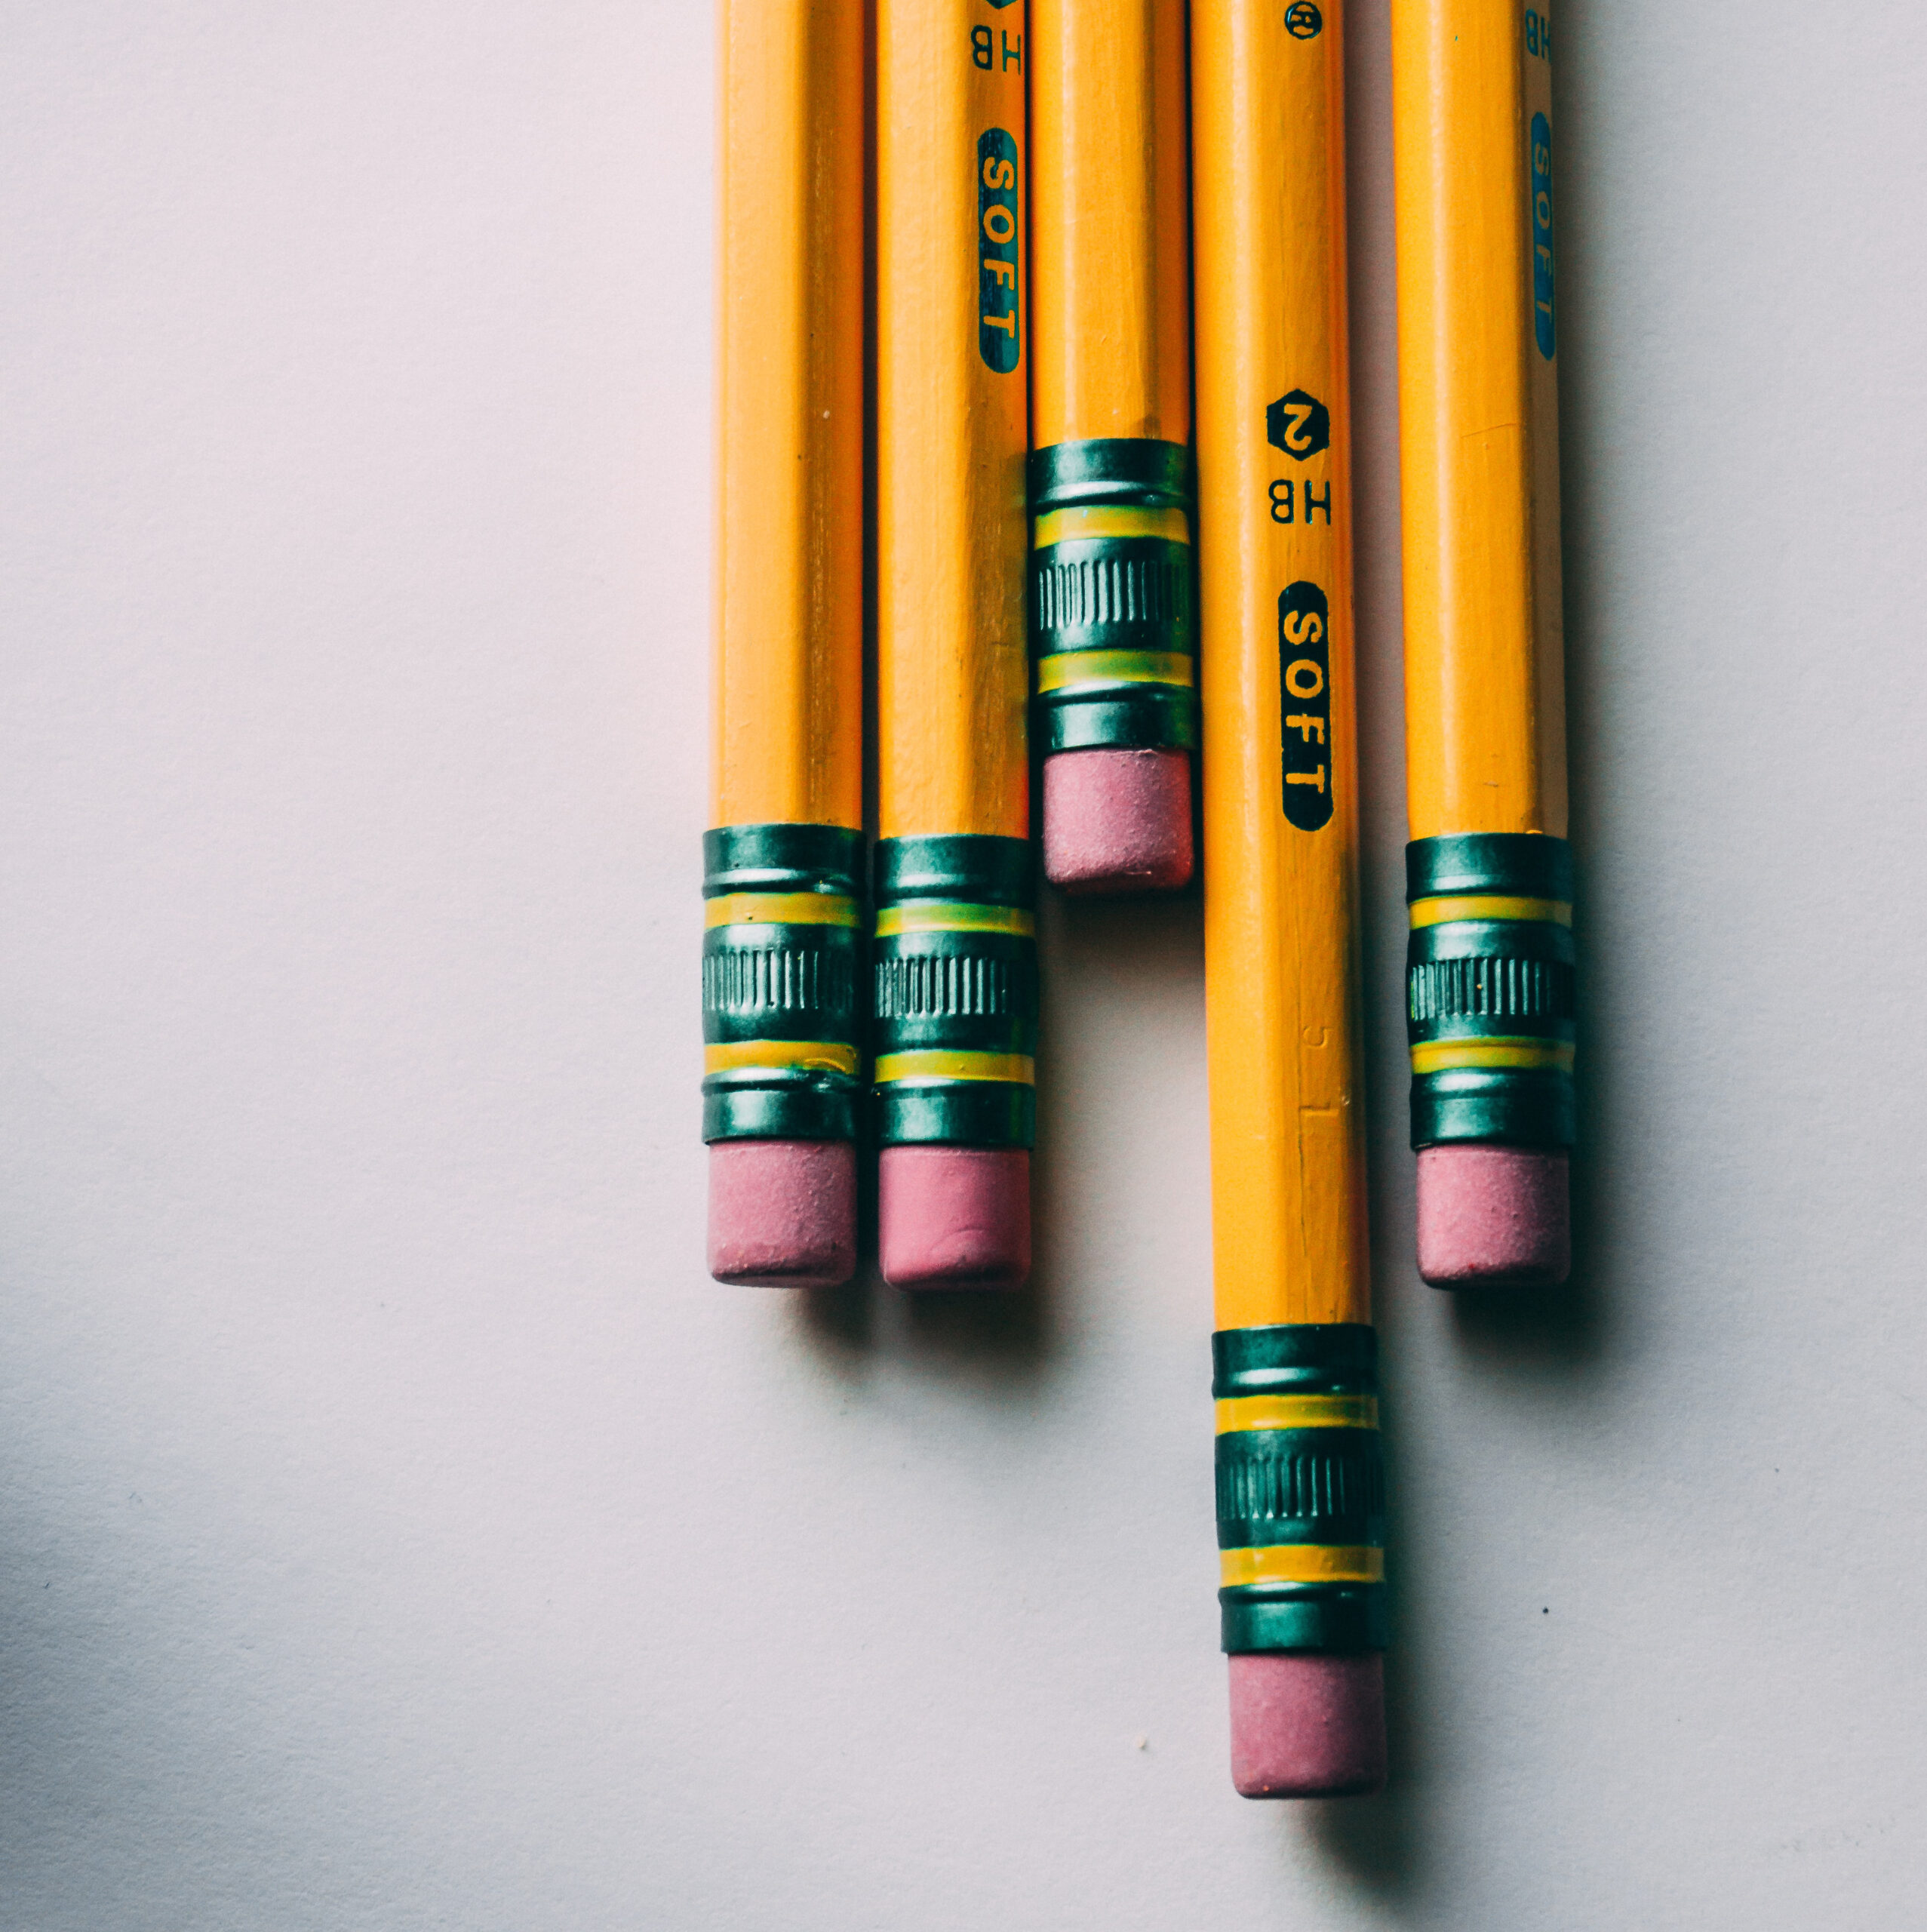 To loan a pencil or not to loan a pencil? That is the question